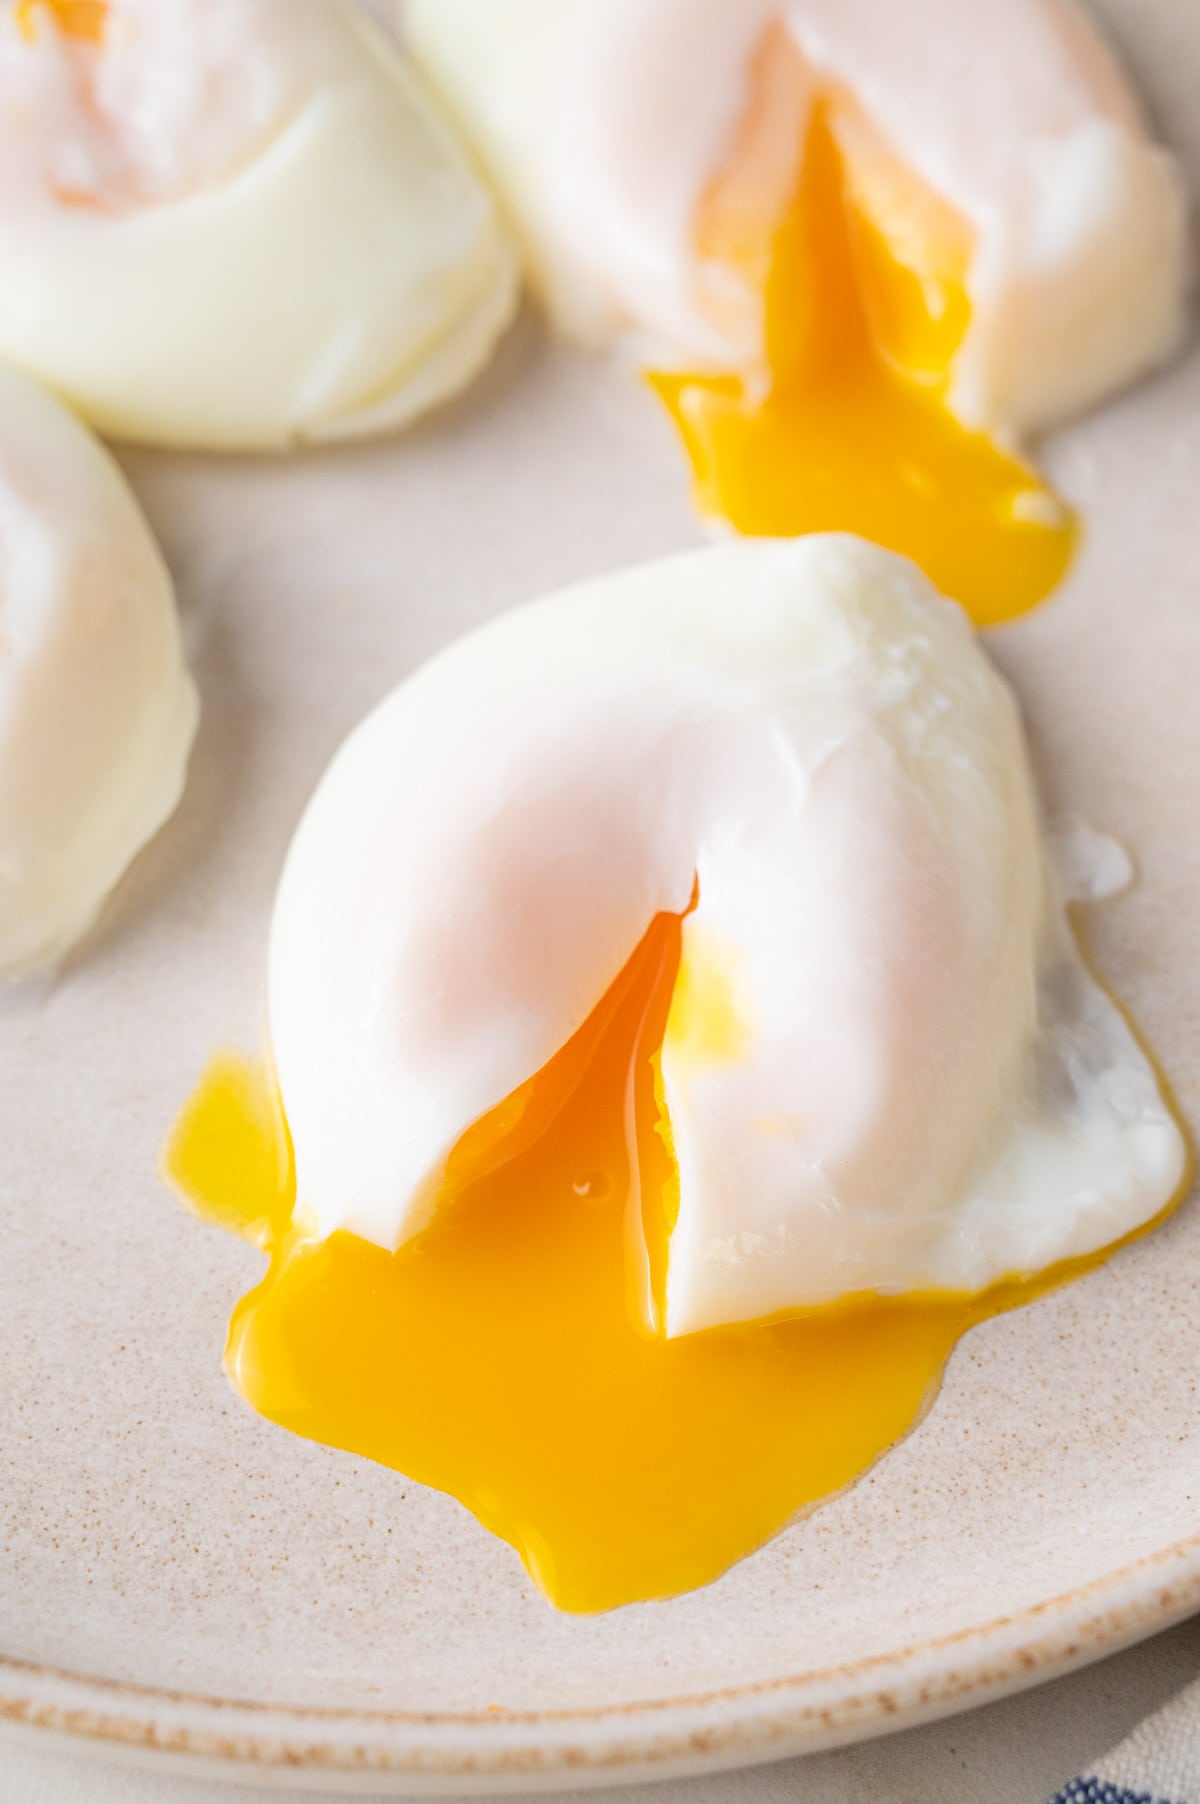 Poached egg with runny egg yolks on a beige plate.